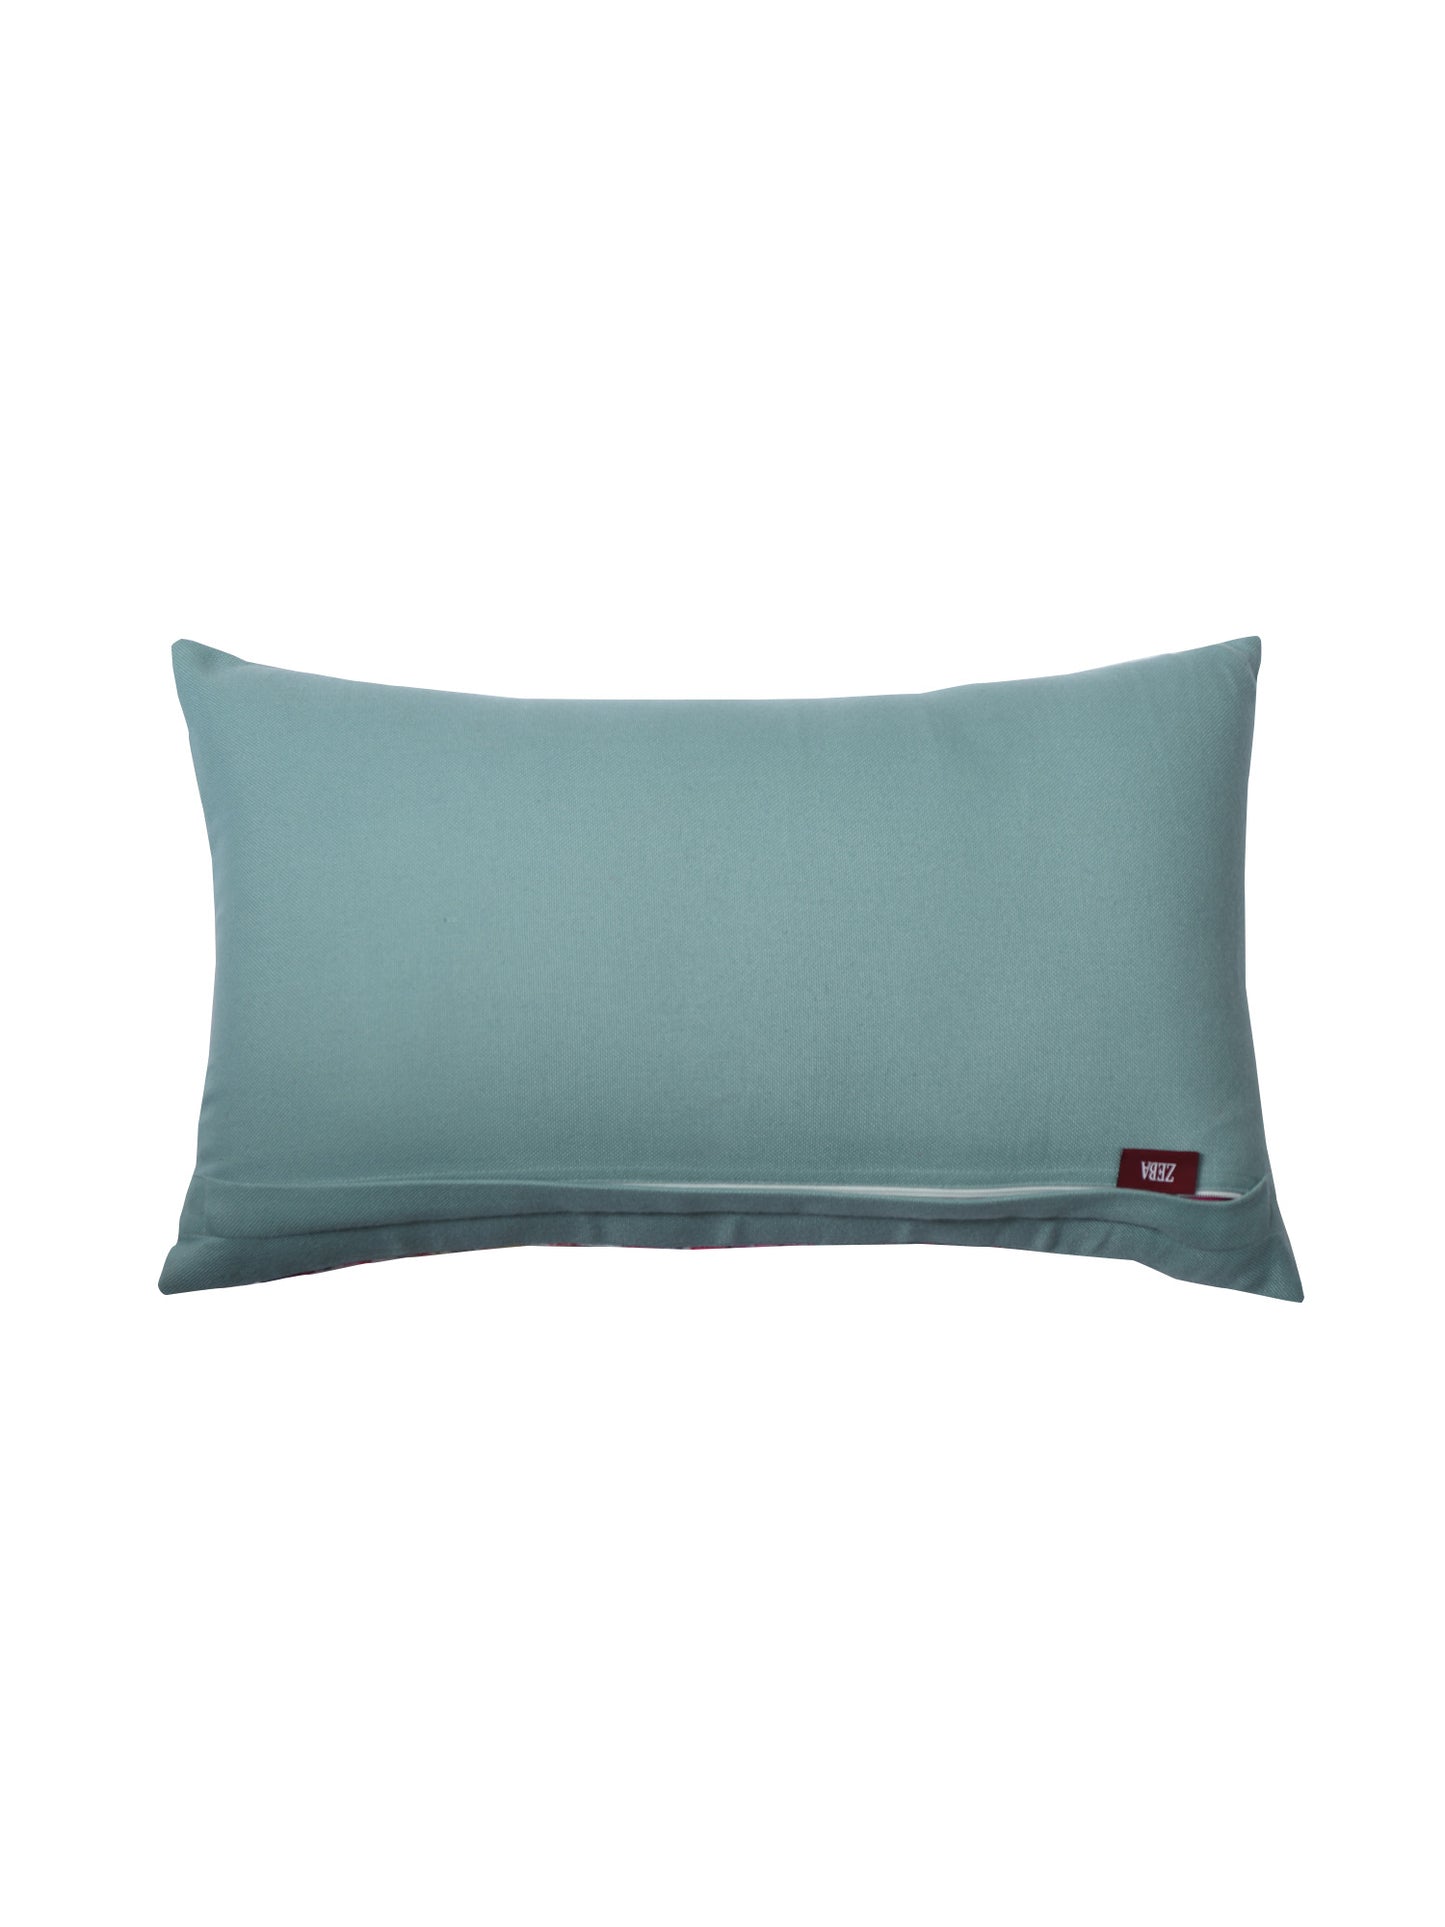 Cushion Cover for Sofa, Bed Poly Canvas Aqua Fin Print | Multi - 12x22in(30x56cm) (Pack of 1)